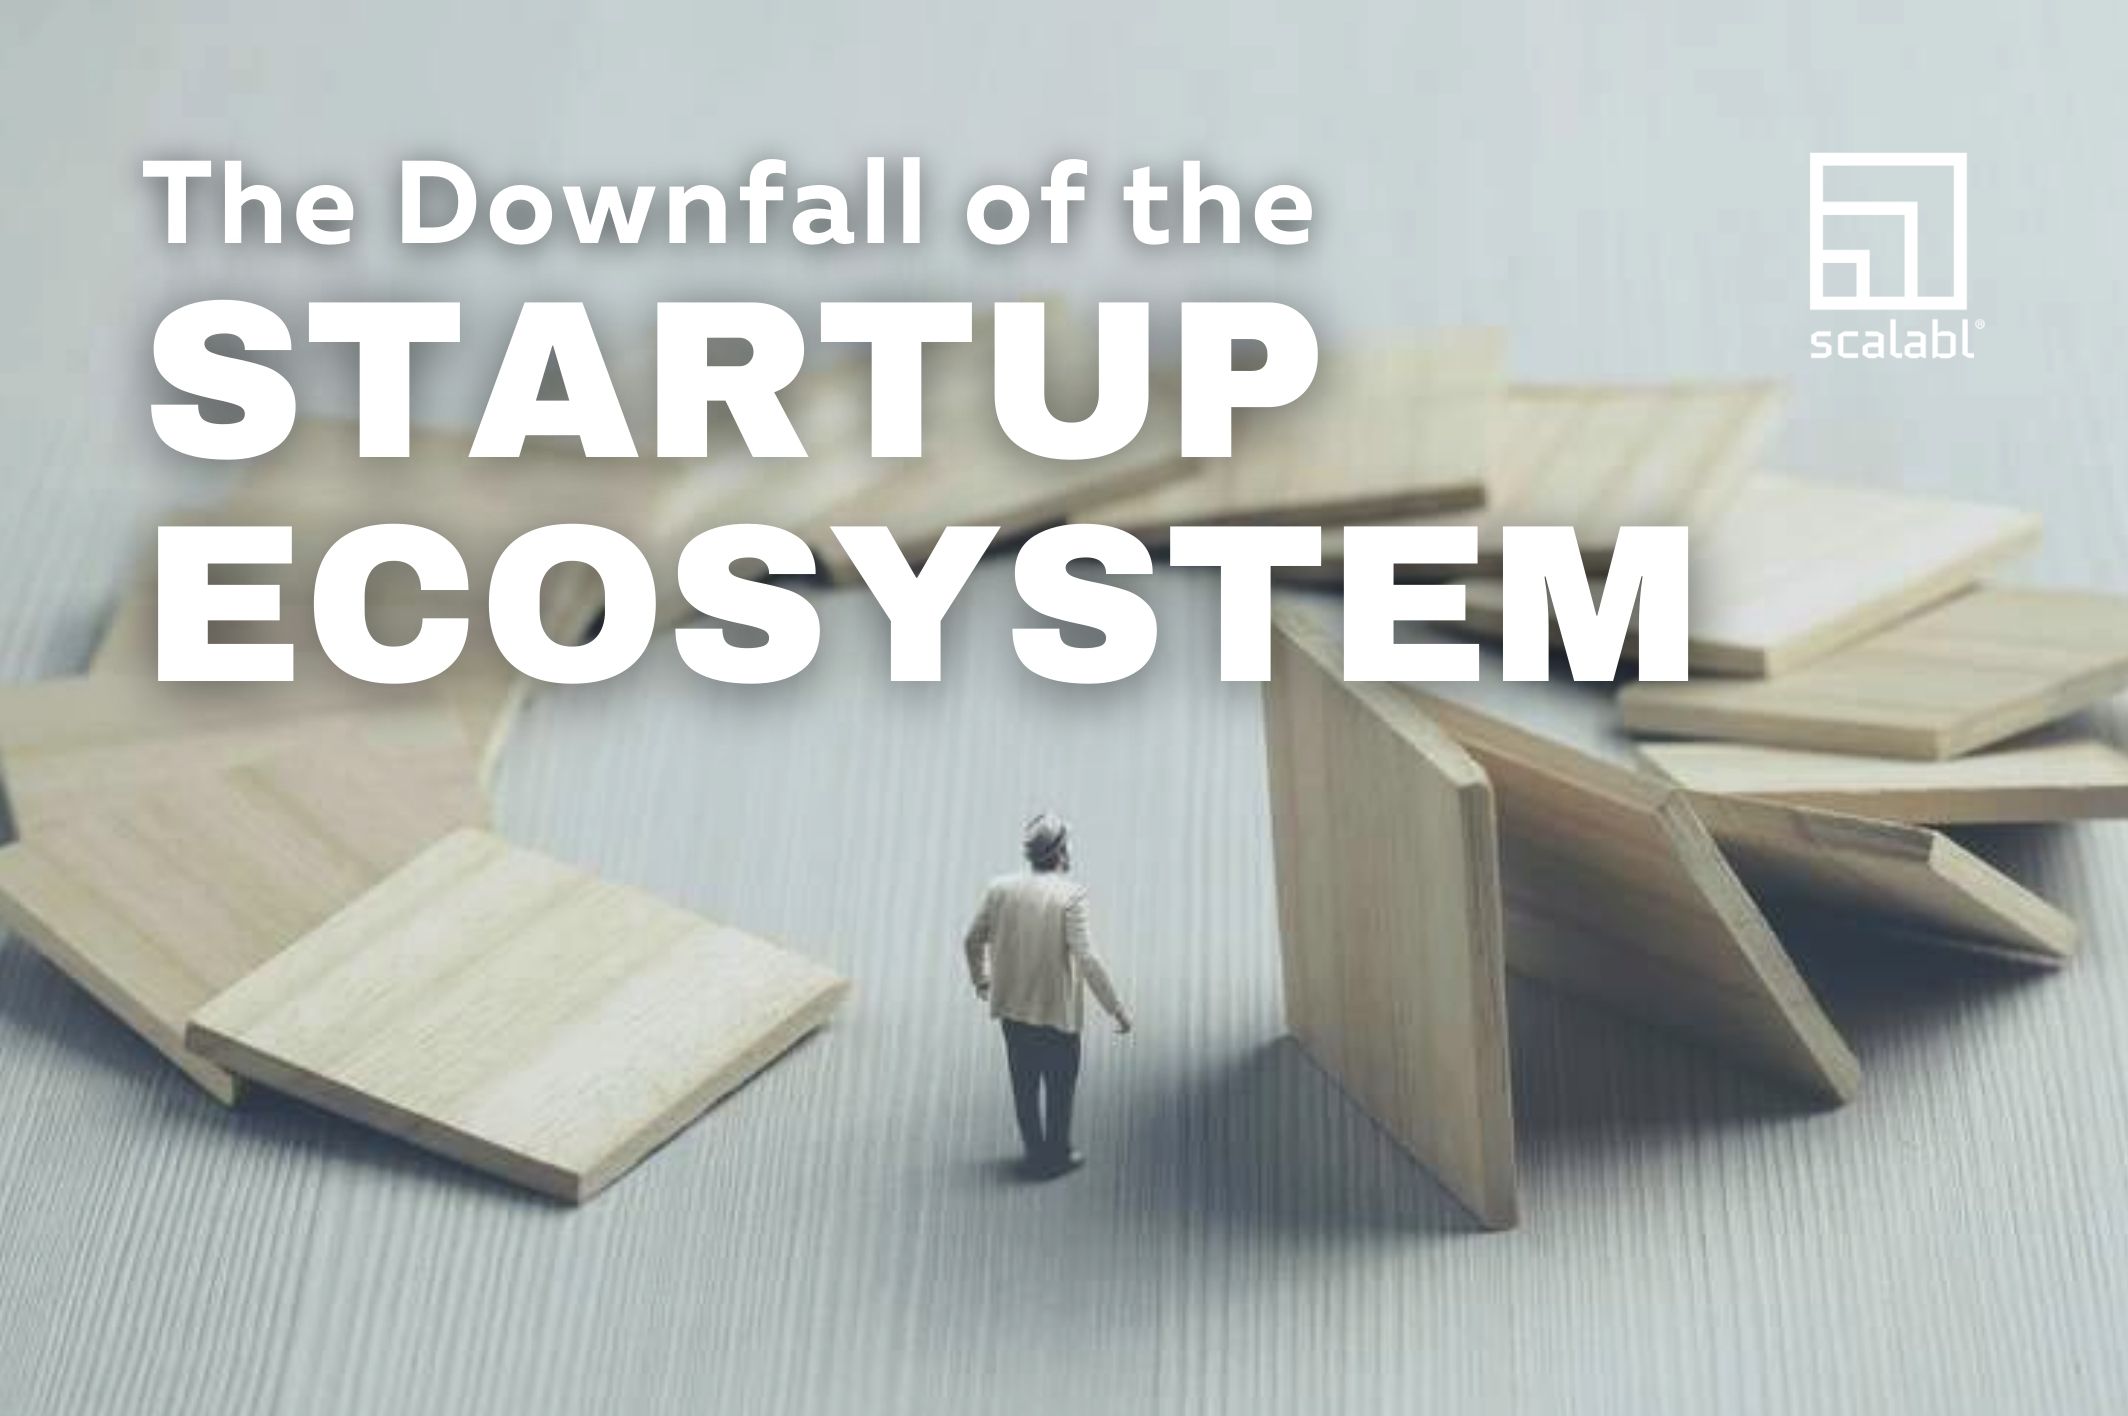 The Downfall of the Startup Ecosystem